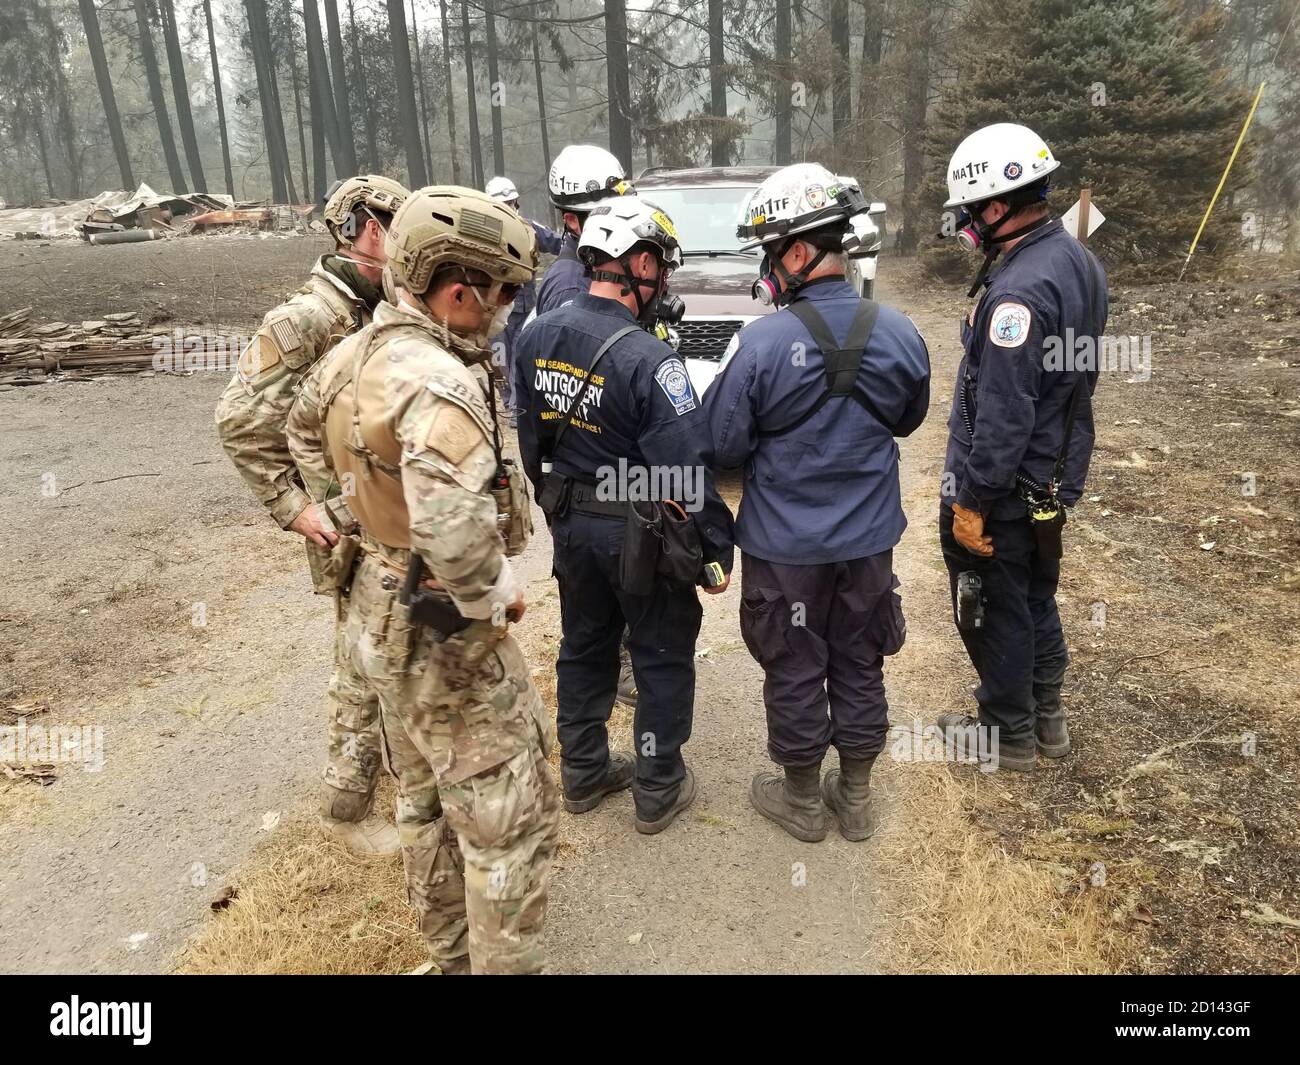 Personnel from U.S. Customs and Border Protection (CBP) work with state and federal partners in support of search and rescue efforts during the wild fires in Oregon, Sept. 17, 2020 Stock Photo